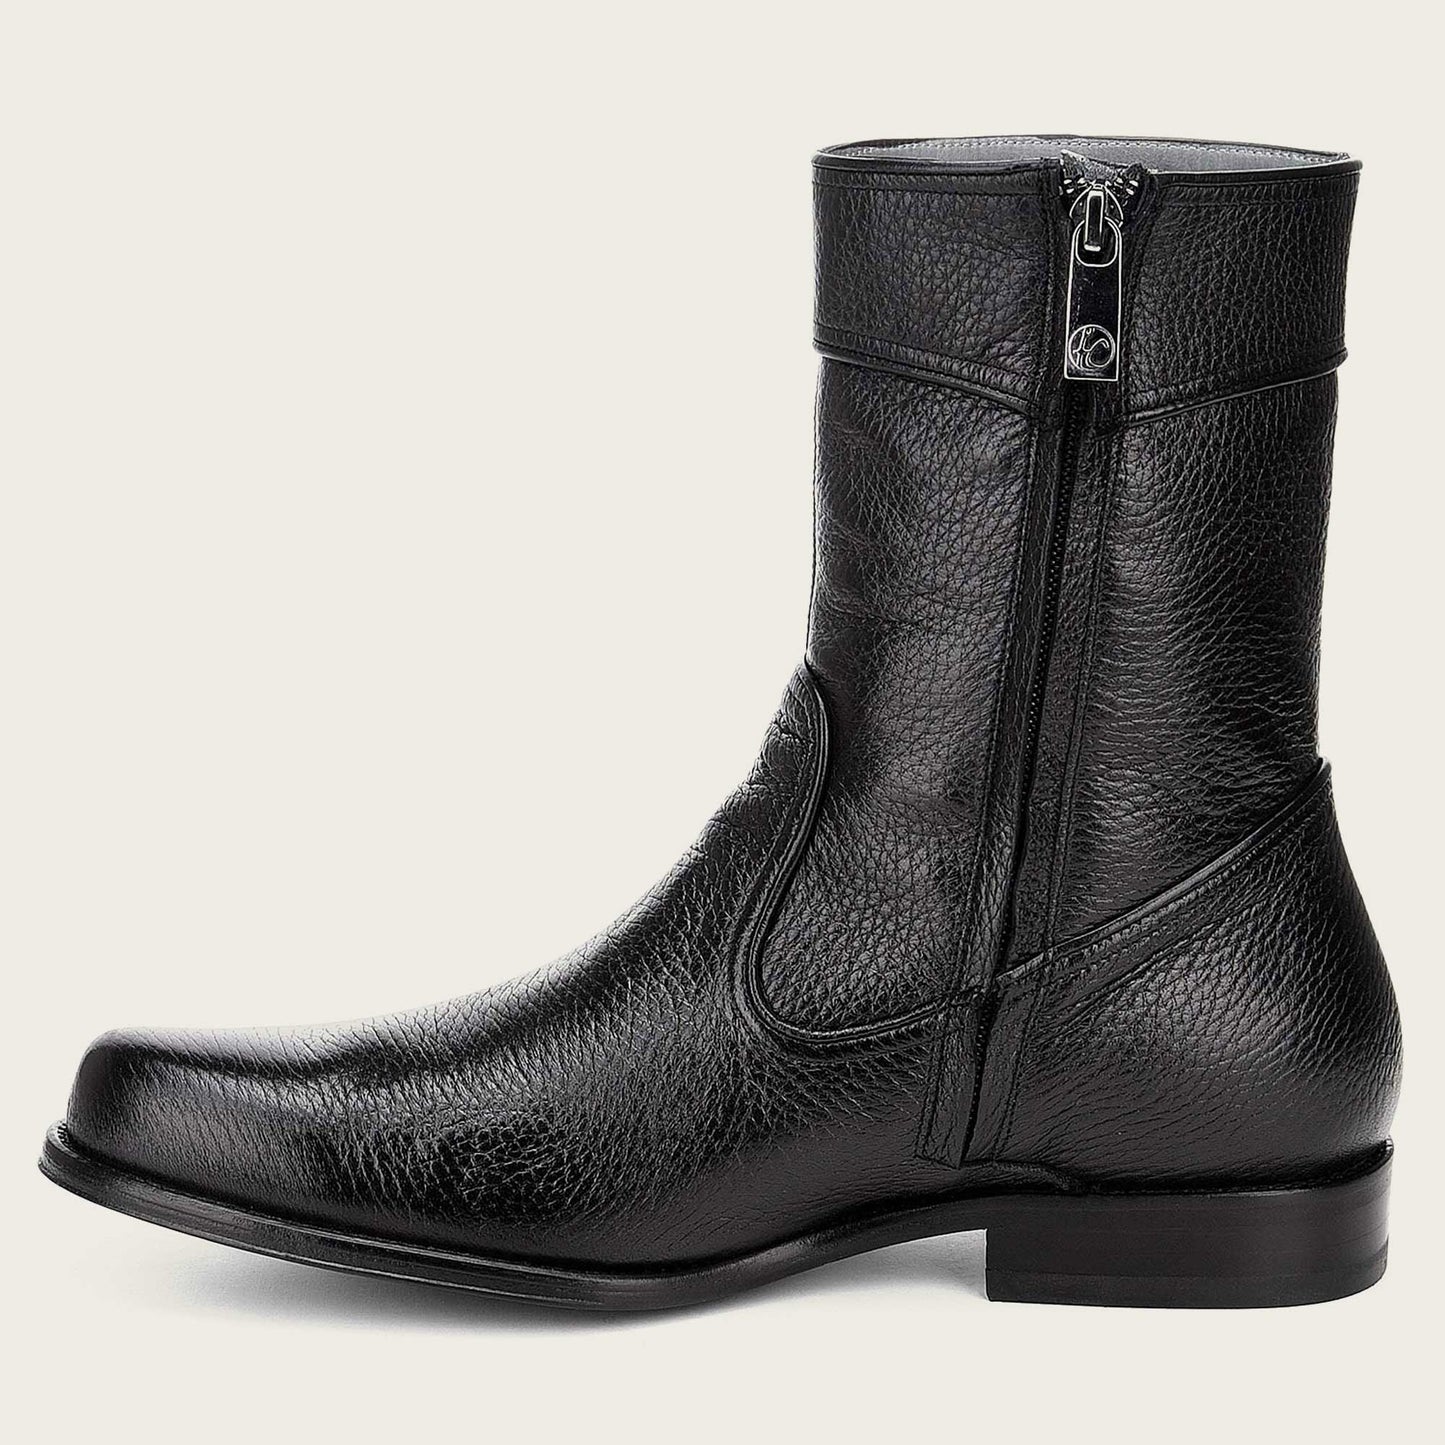 Artisanal hand-painted black leather boot featuring raised edges on the rims for a stylish and rugged look